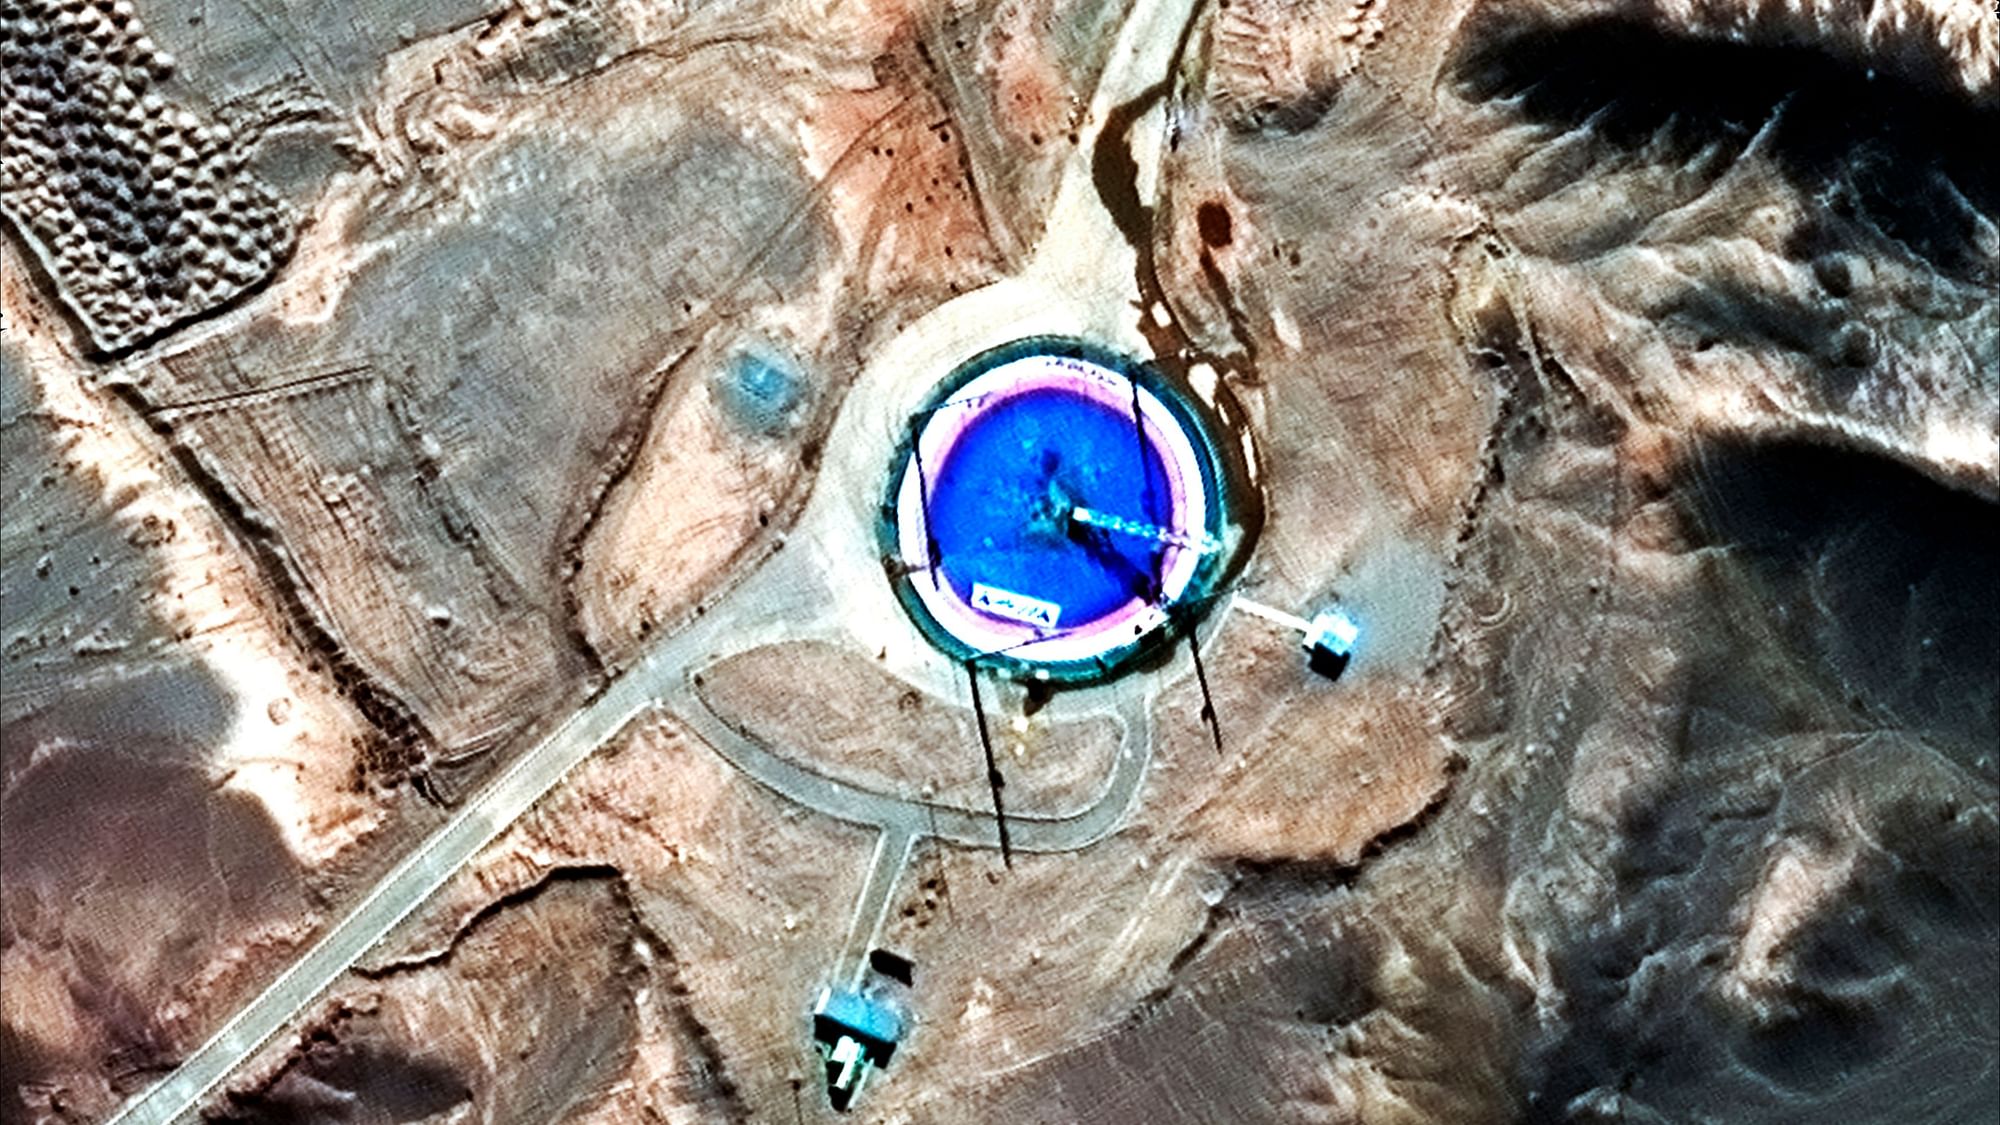 Satellite images showed an empty launch pad and burn marks at the Imam Khomeini Space Center in Iran’s Semnan province.